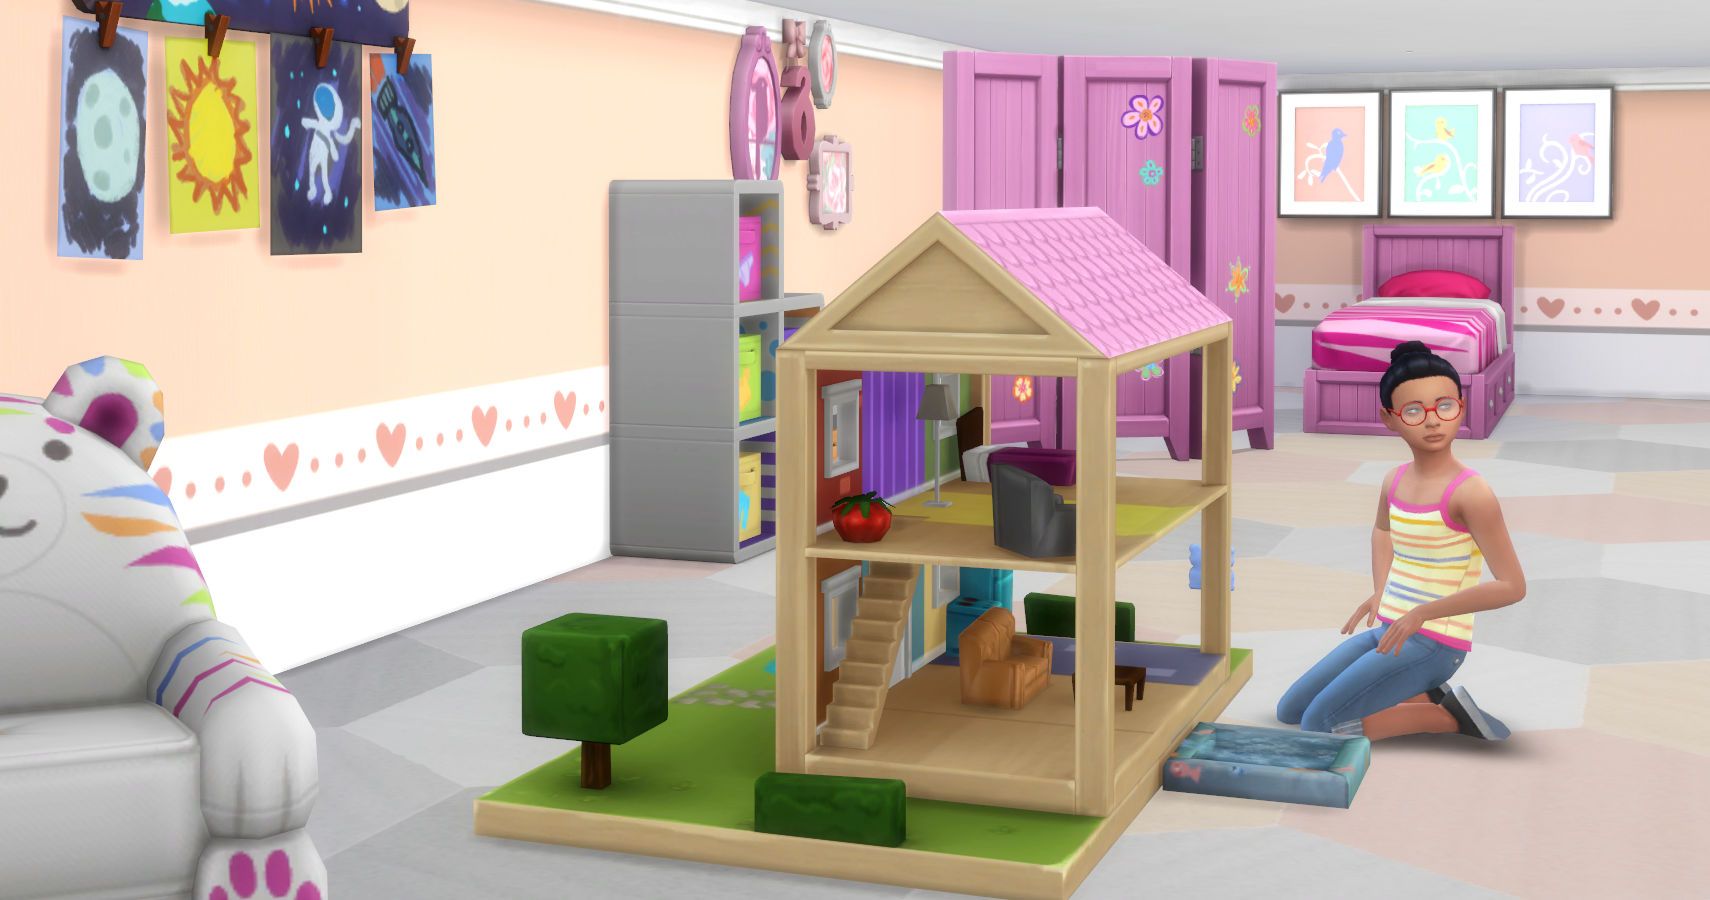 A short height kids room created with a platform.